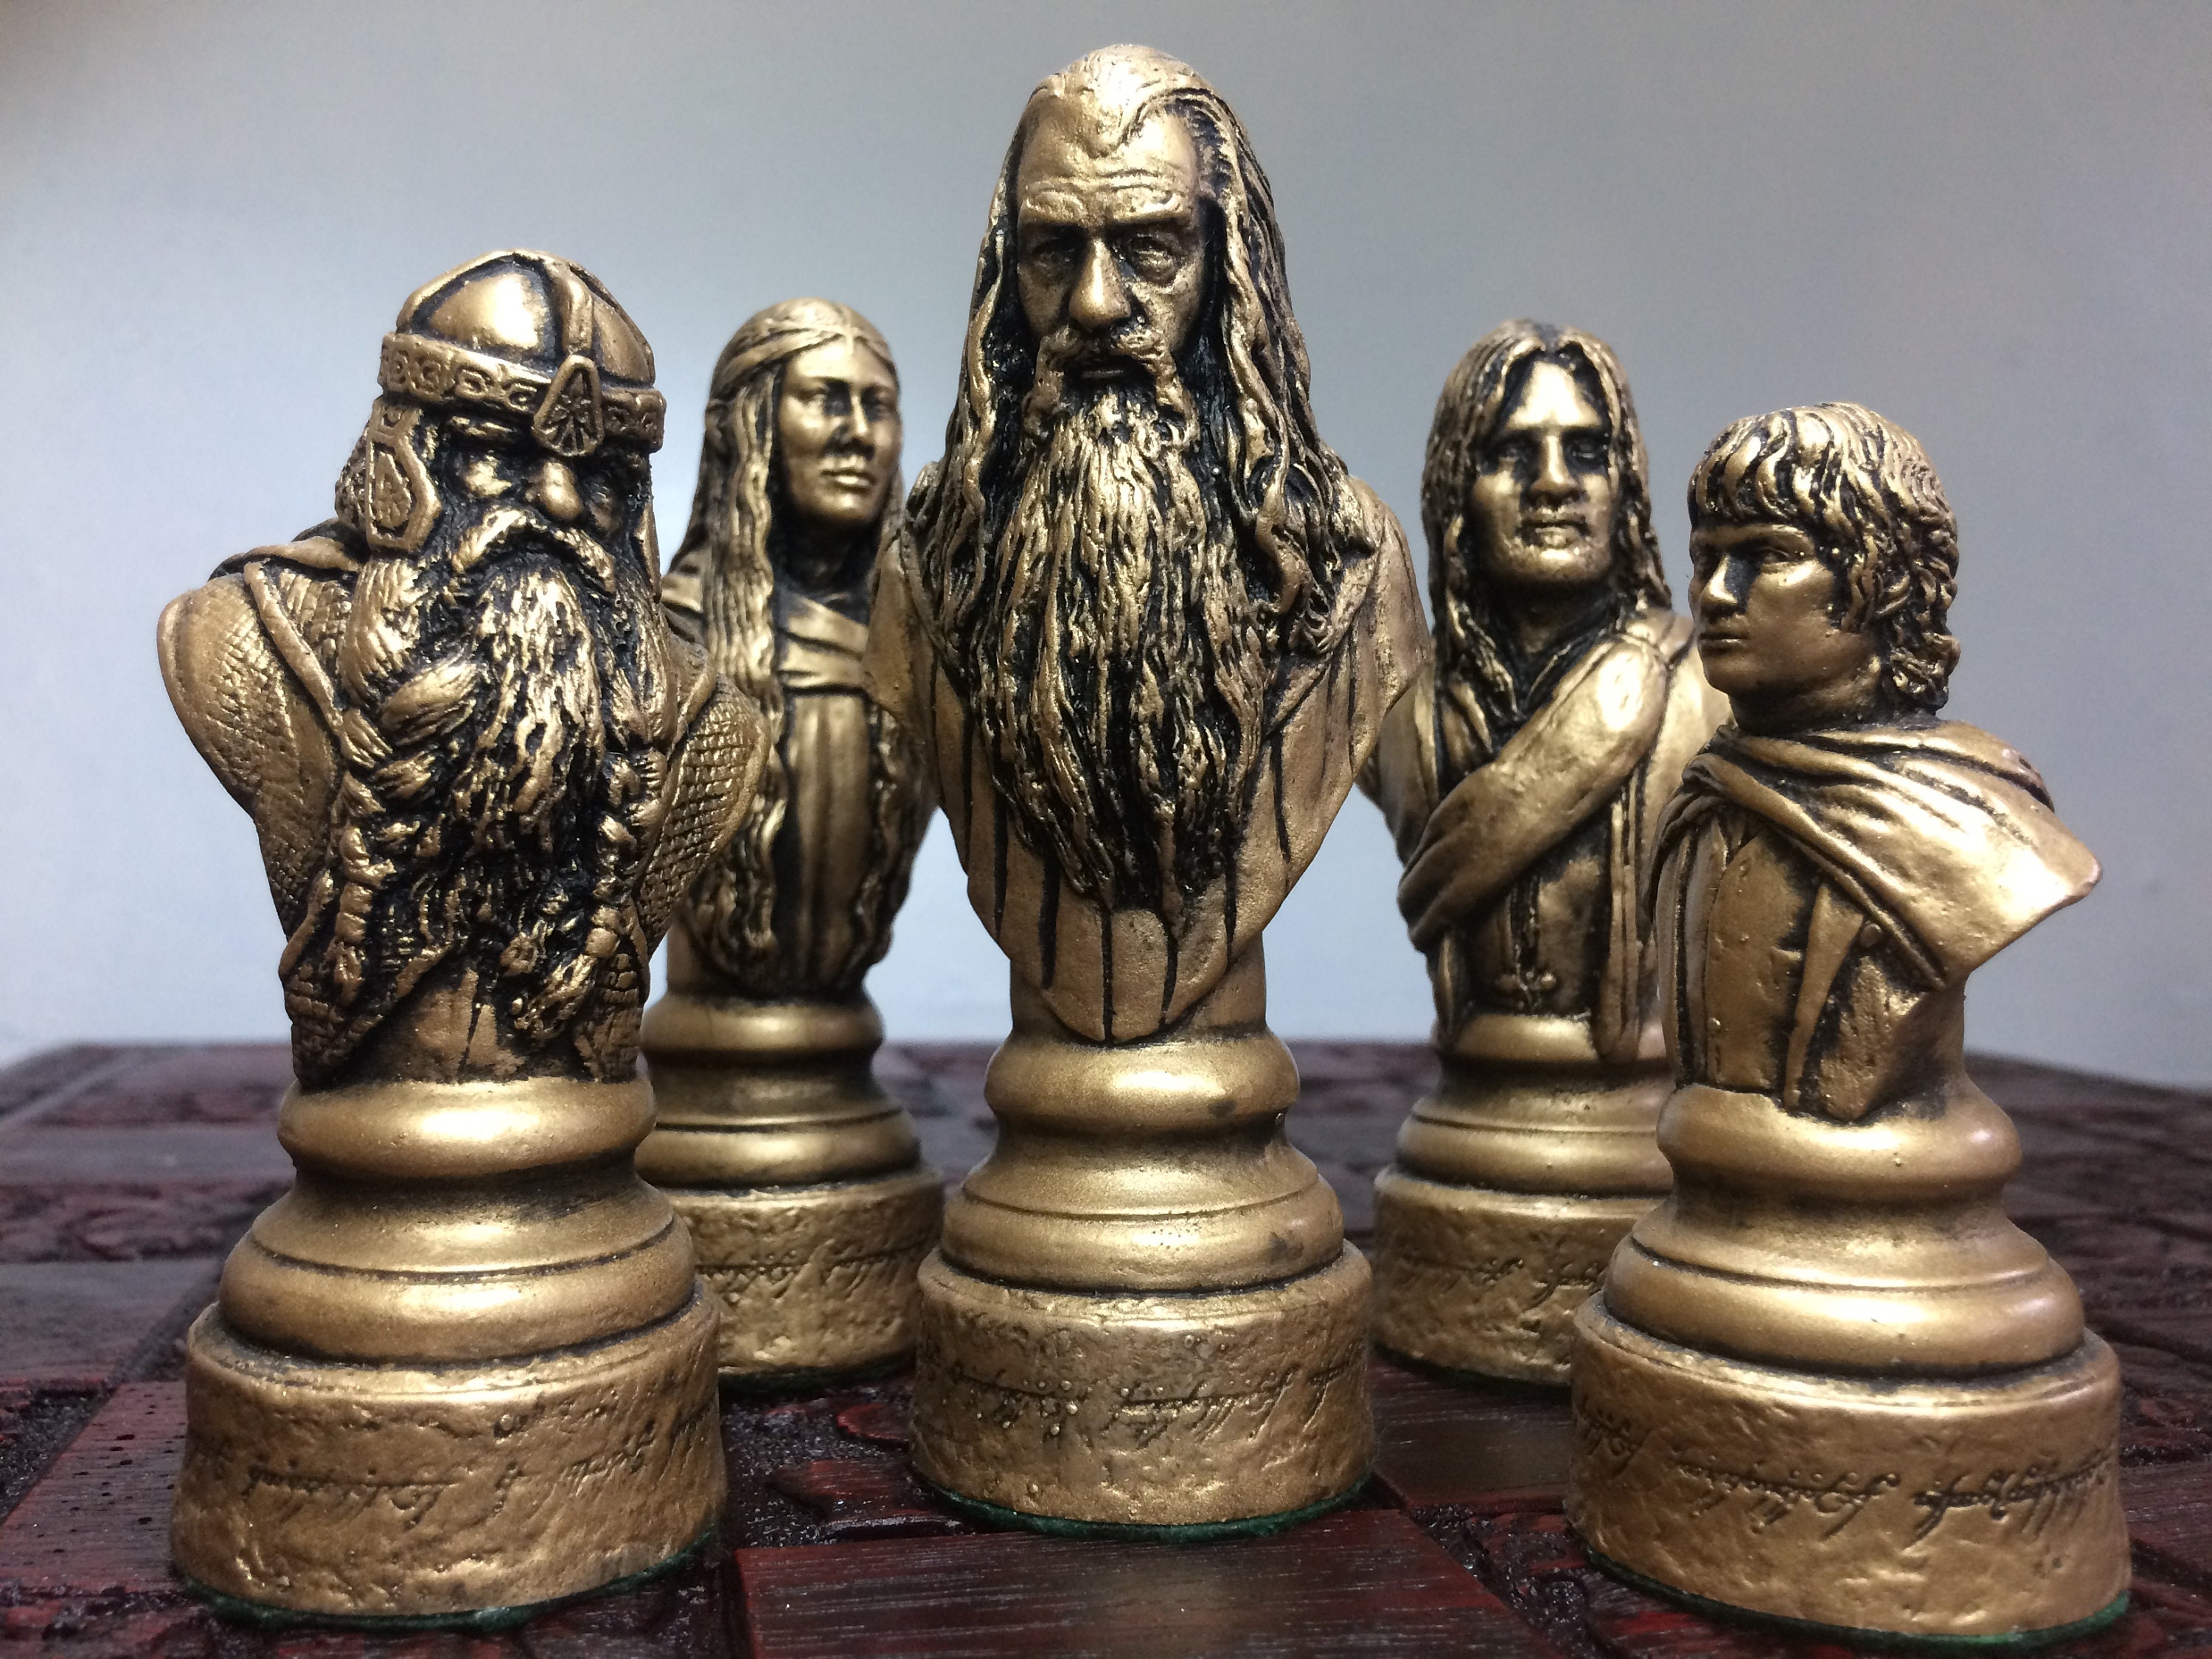 Lord of the Rings chess set - LOTR Chess Set Handmade (Chess pieces only)